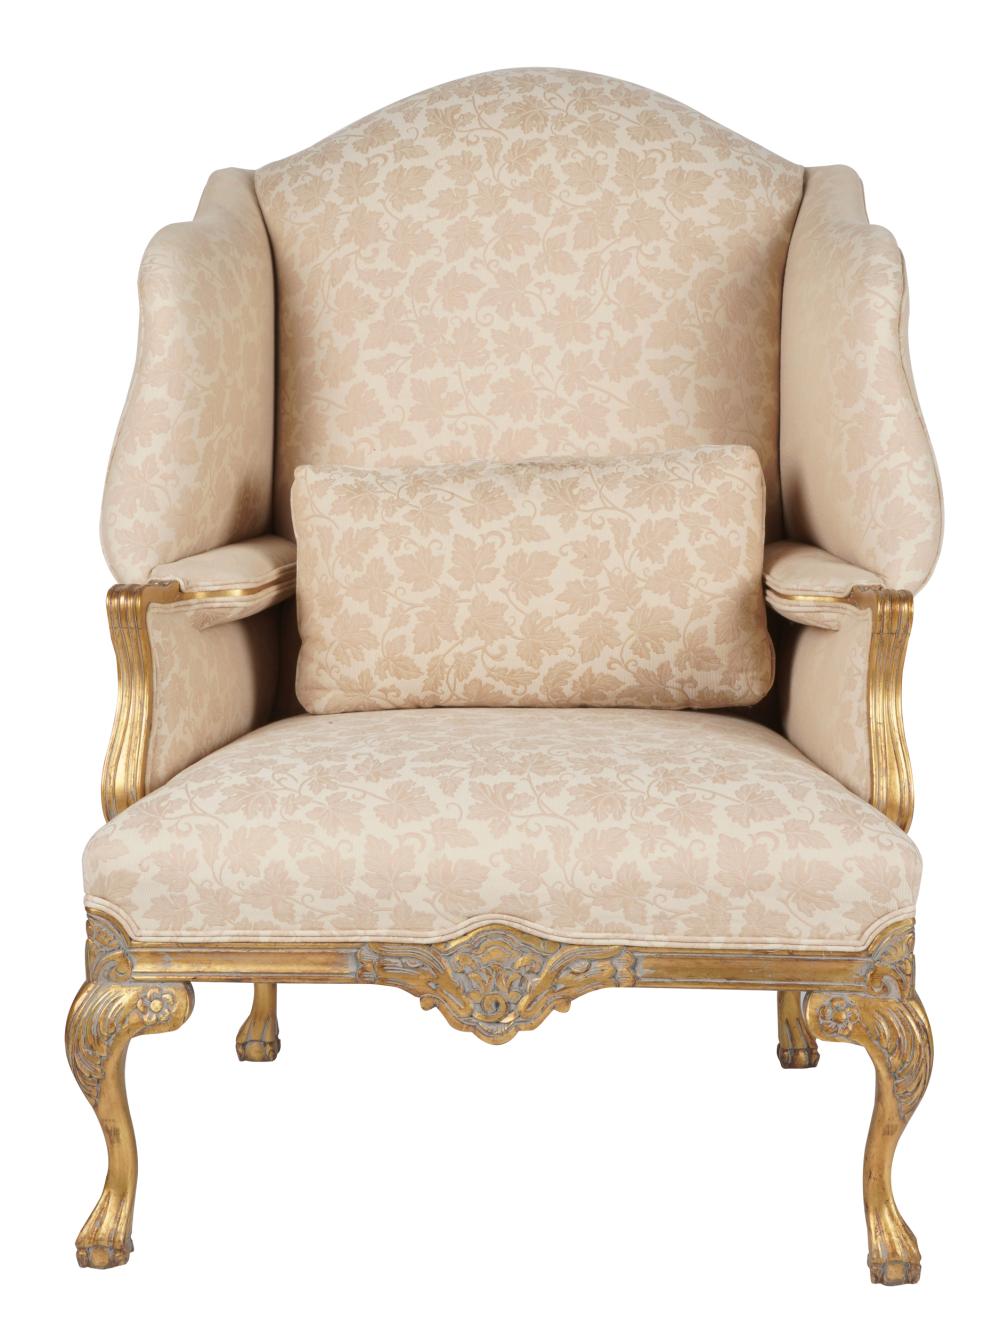 LOUIS XV-STYLE GILTWOOD WING CHAIR20th